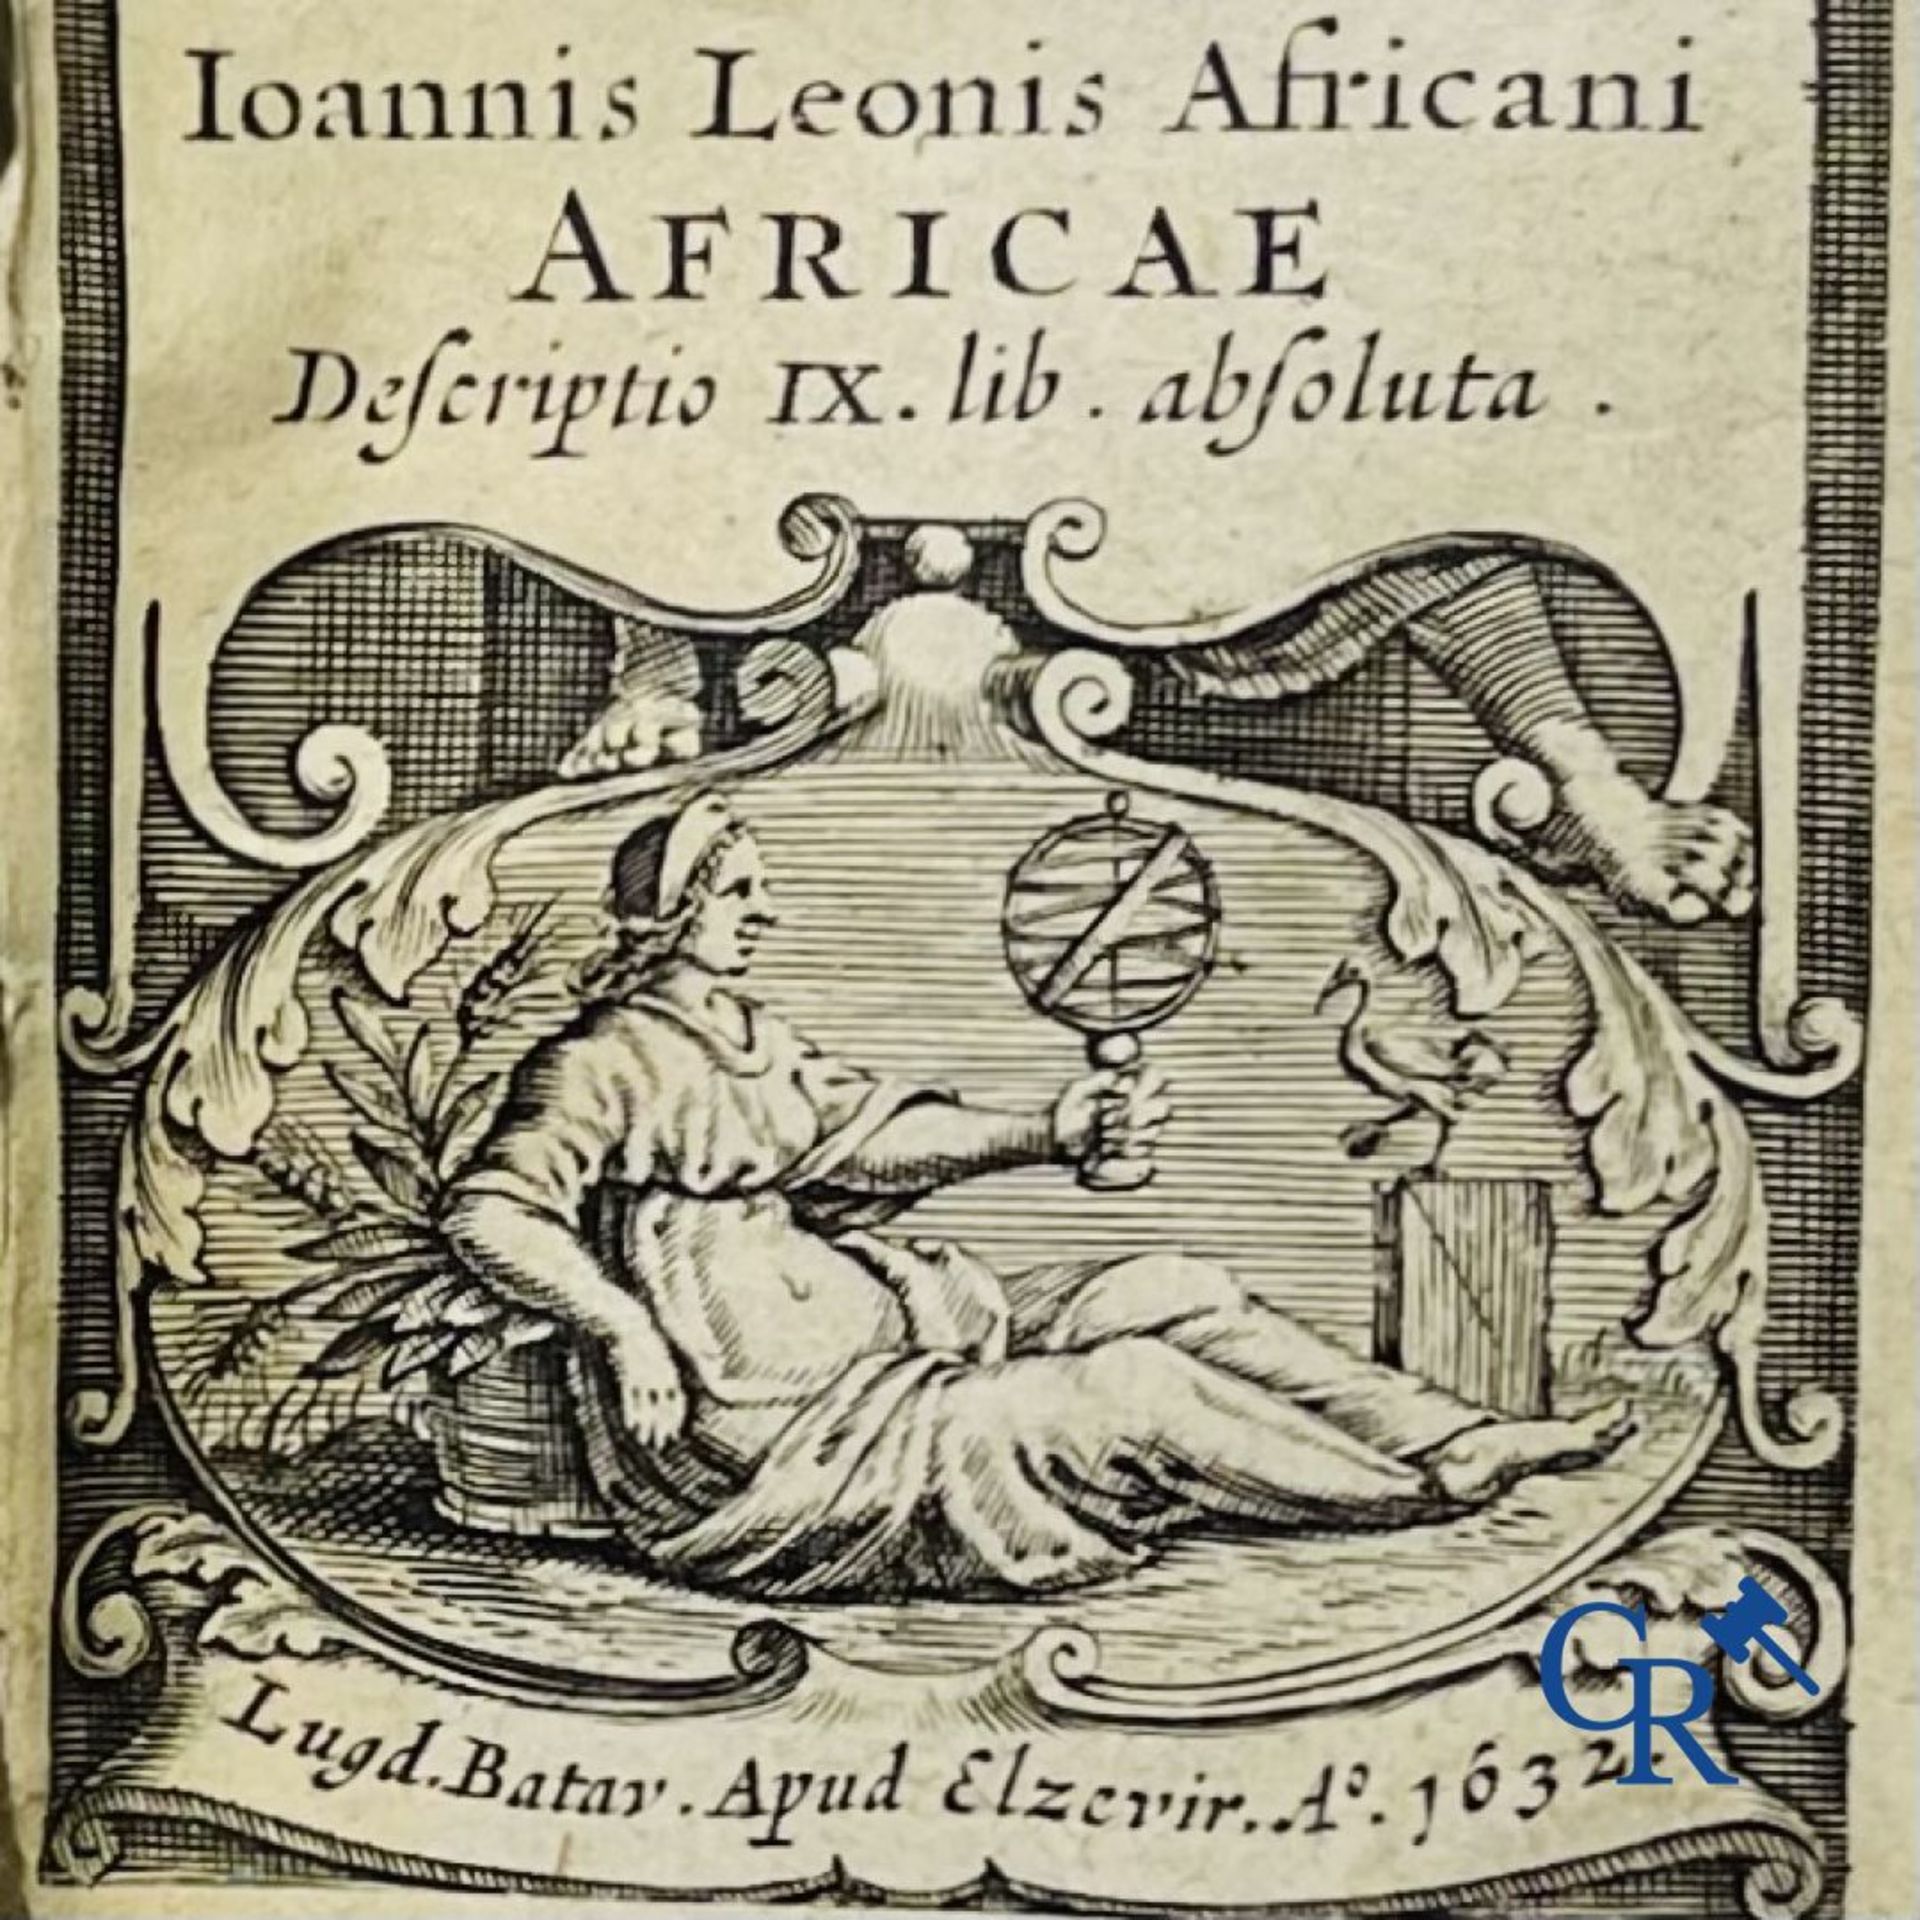 Early printed books: Johannis Leonis Africani. Africae, Elzevier 1632.